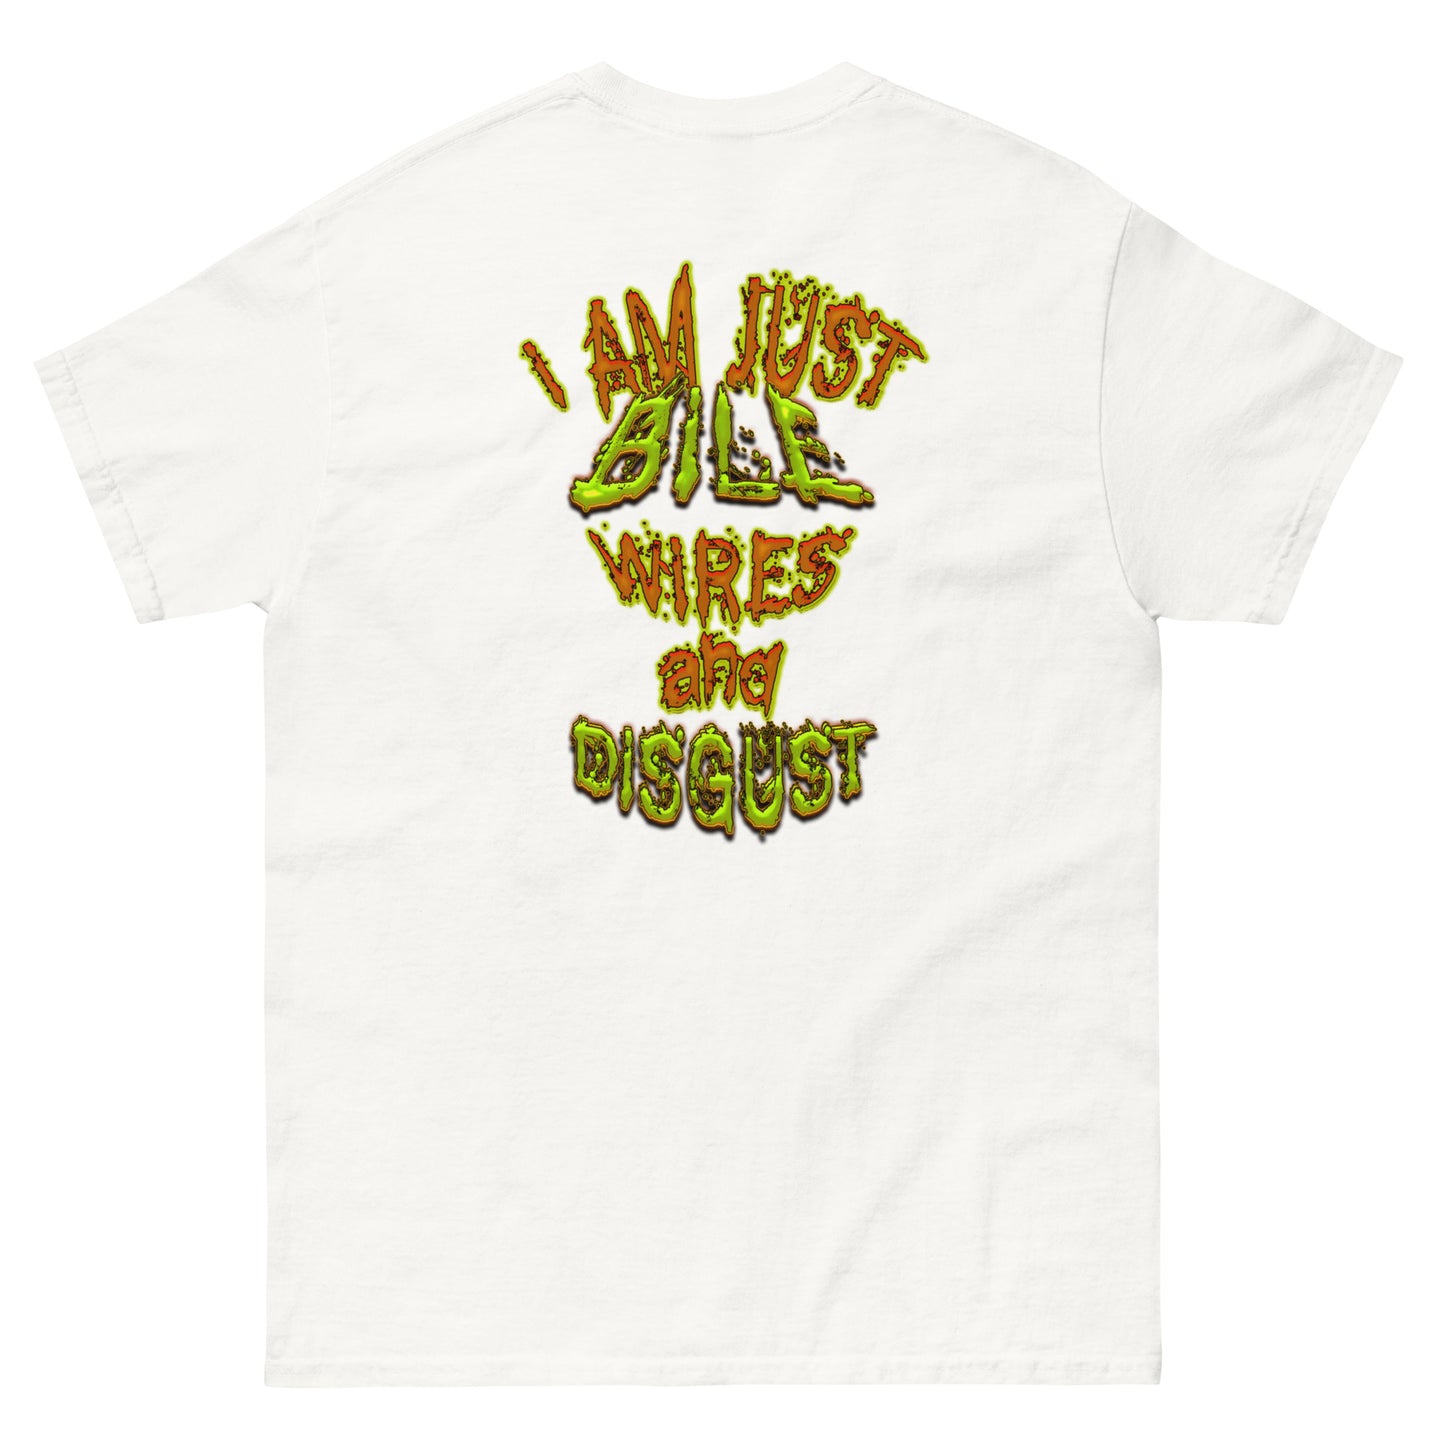 Rikets - Bile Wires & Disgust 2 sided T-Shirt